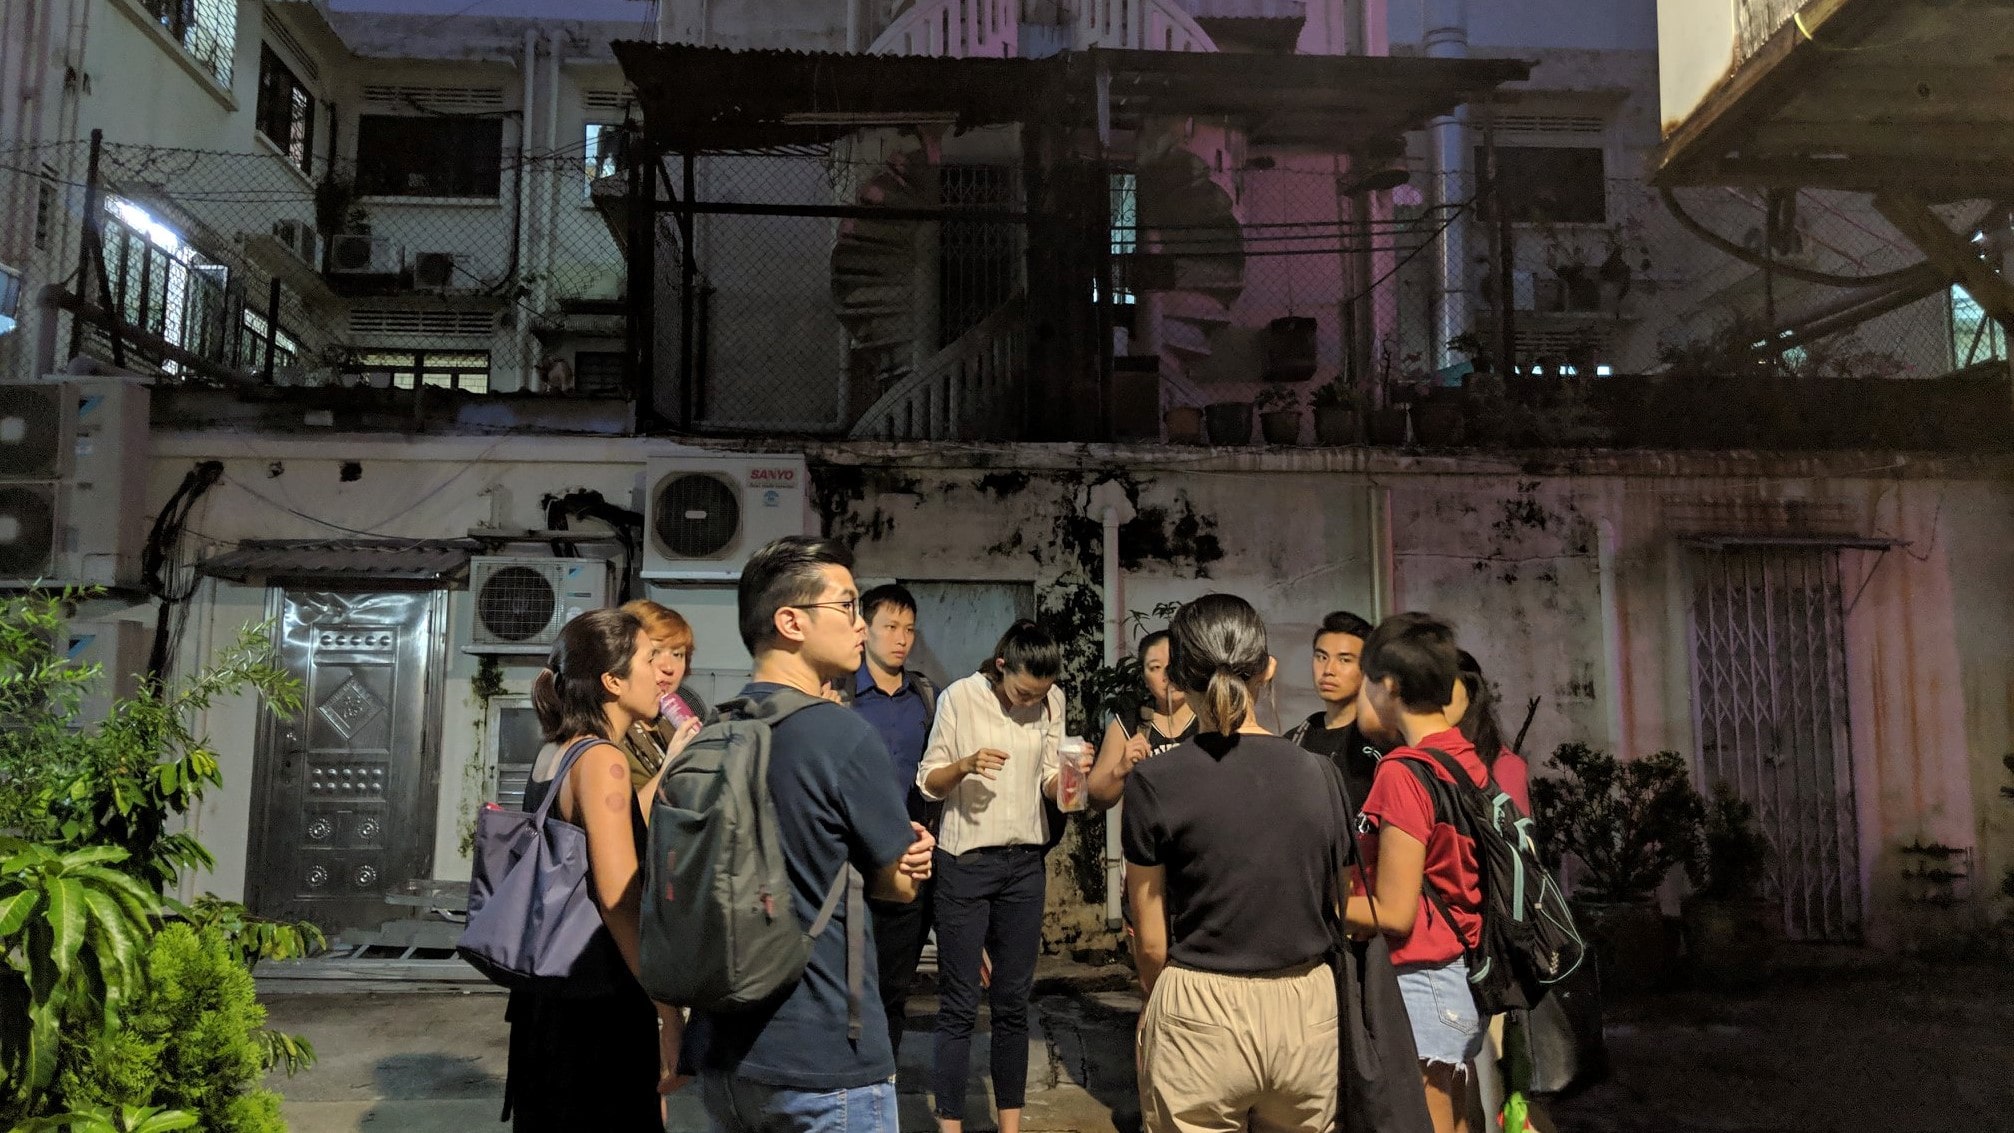 Its guides offer a thought-provoking commentary that mixes cultural interest with pertinent local social and policy issues, giving you a nuanced view of life in Singapore rarely seen by tourists — and a chance to enjoy mouthwatering food along the way. Photo from Geylang Adventures